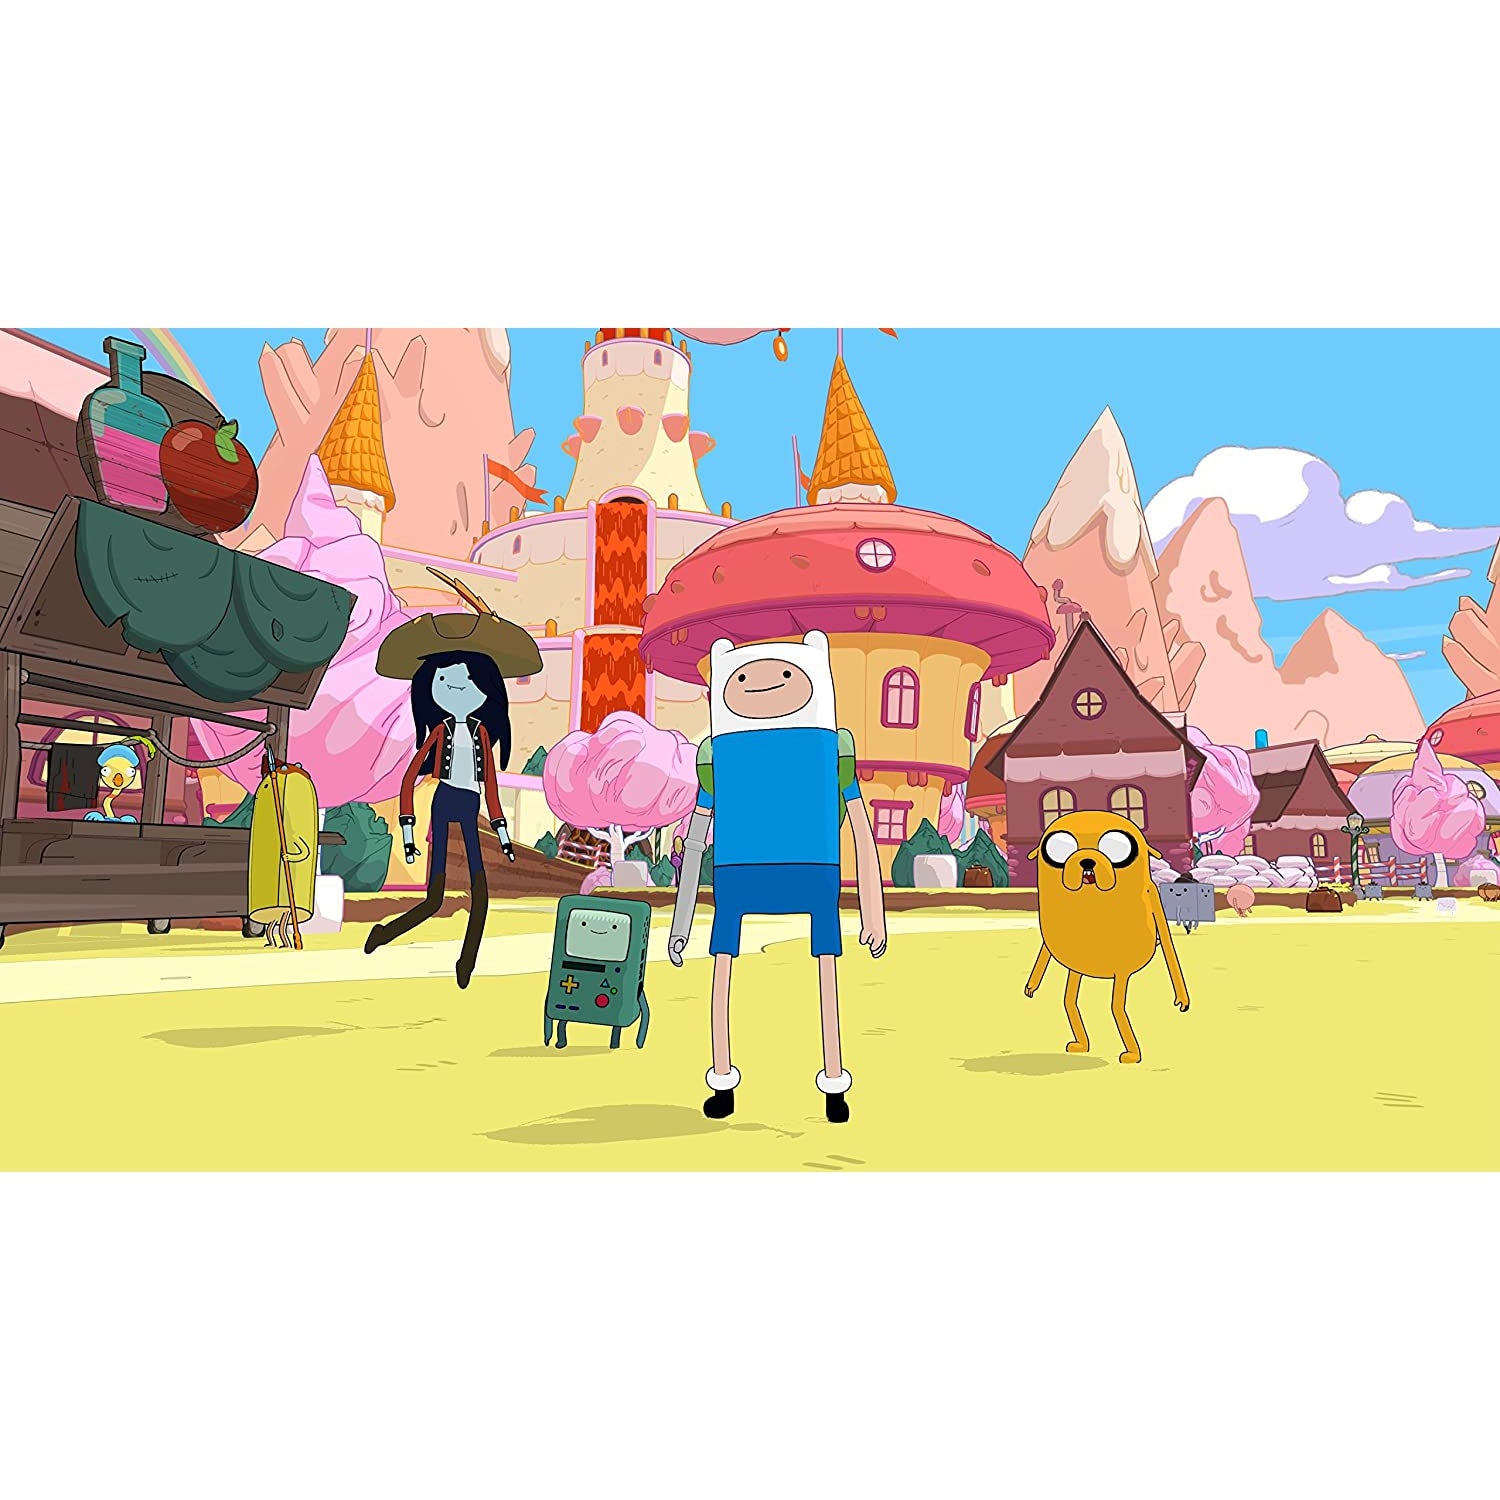 Adventure Time Pirates of The Enchiridion (Xbox One)